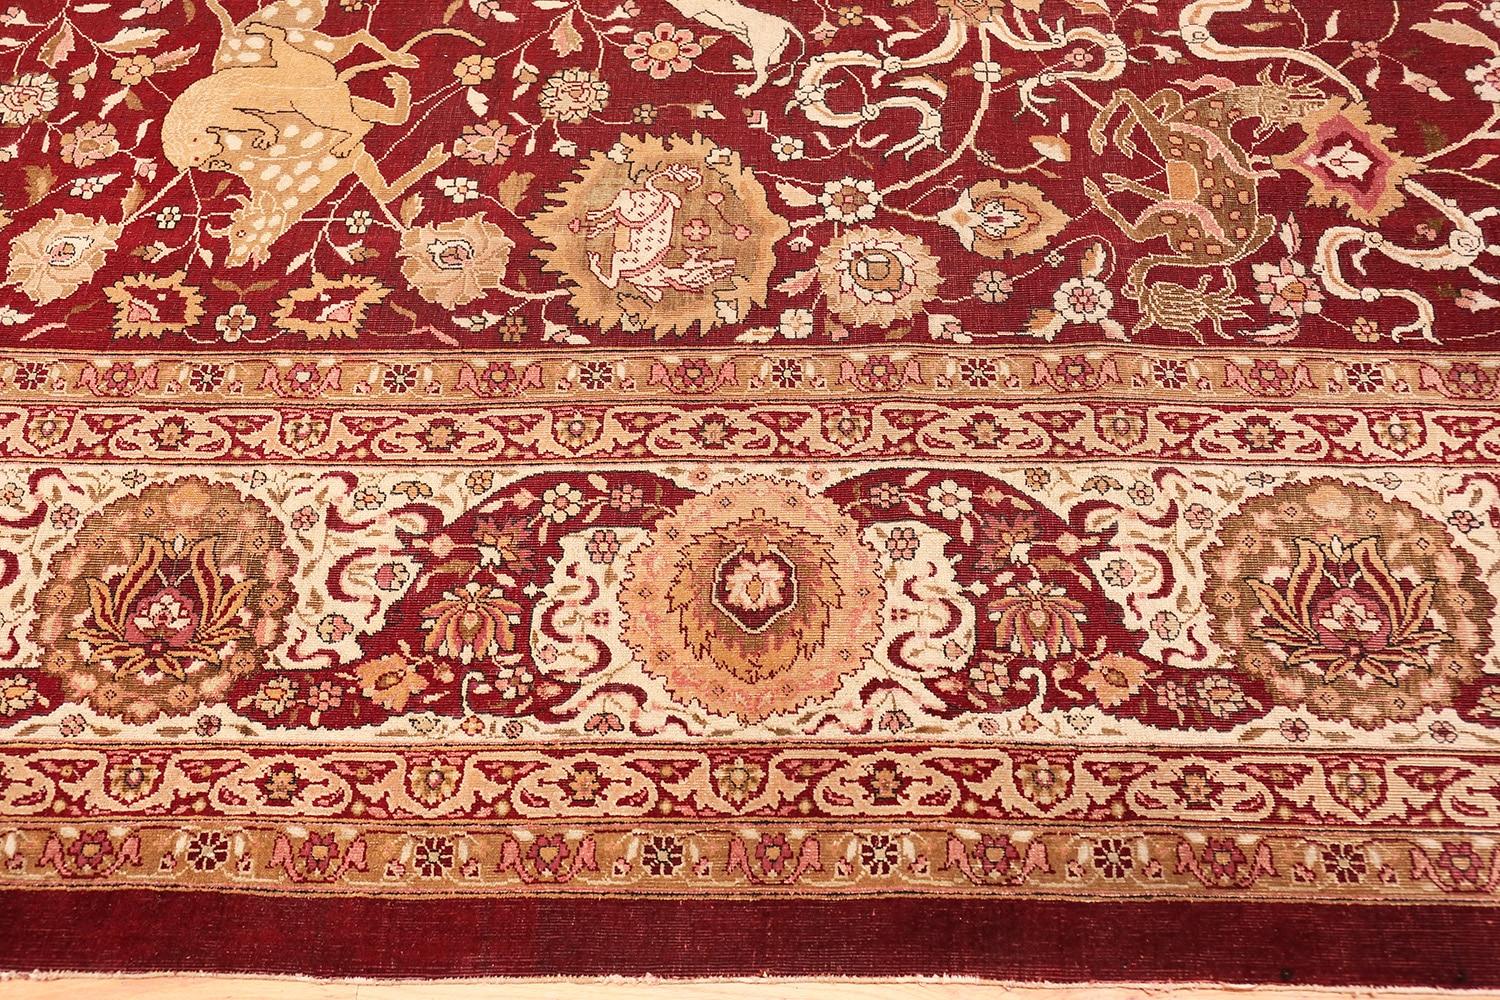 Animal Patterned Room Sized Antique Indian Agra Rug. Size: 10 ft x 13 ft 8 in 1